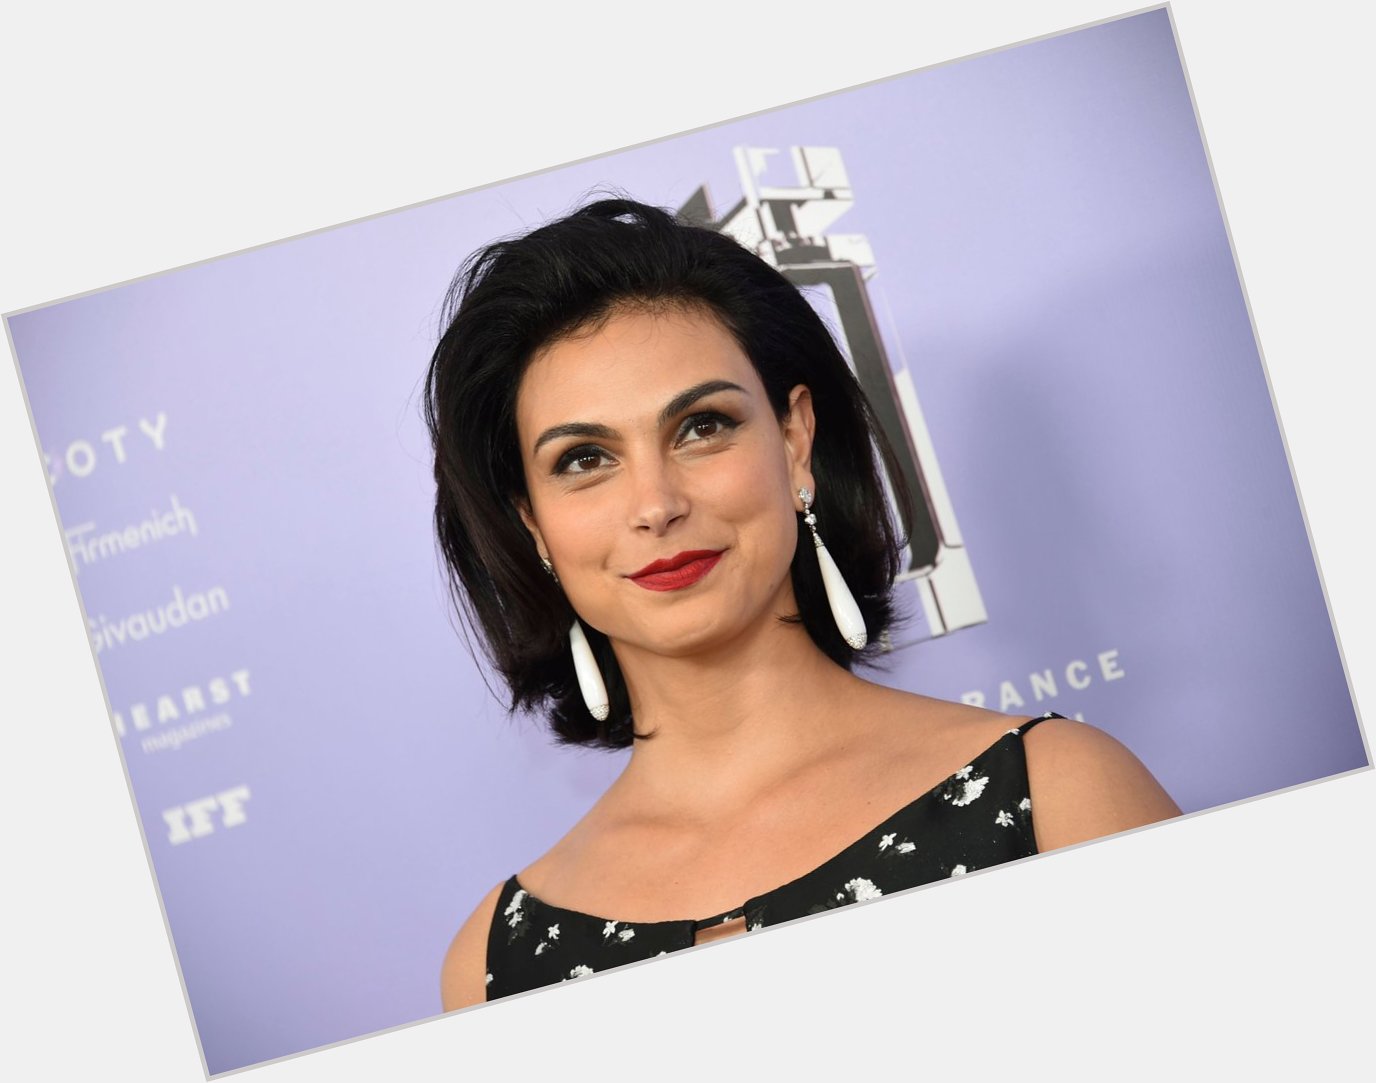 Happy Birthday to Morena Baccarin! Born: June 2, 1979 (age 41 years) 